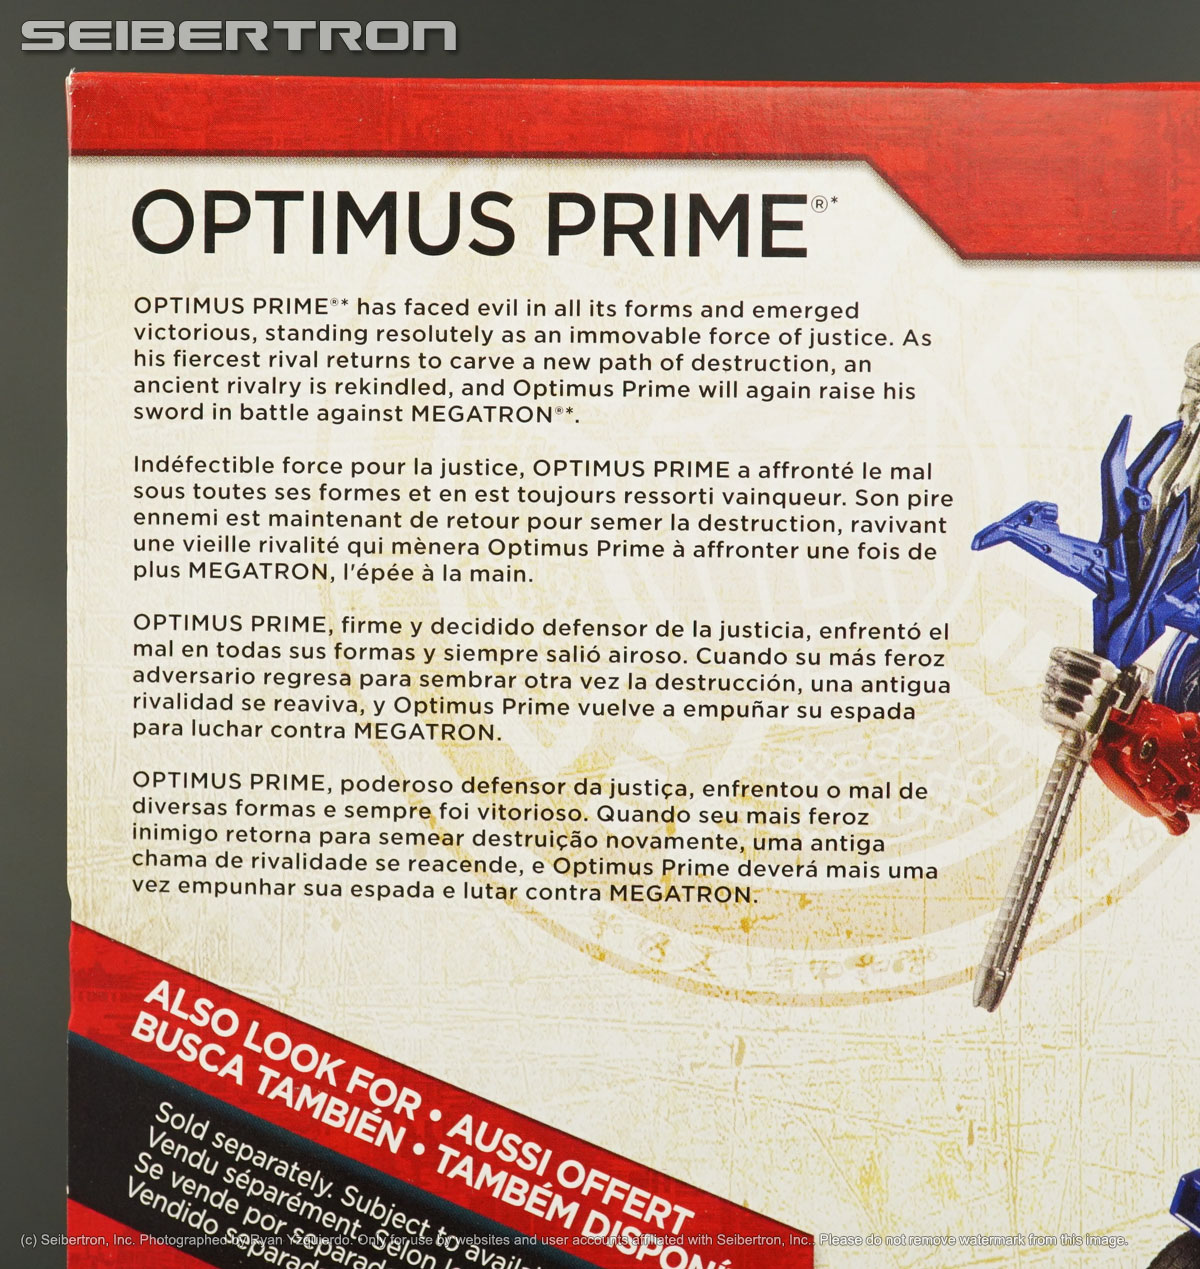 Transformers, Gobots, Shopkins, Masters of the Universe, Teenage Mutant Ninja Turtles, Comic Books, and other listings from Seibertron.com: Leader Class OPTIMUS PRIME Transformers The Last Knight Movie TLK New 2017